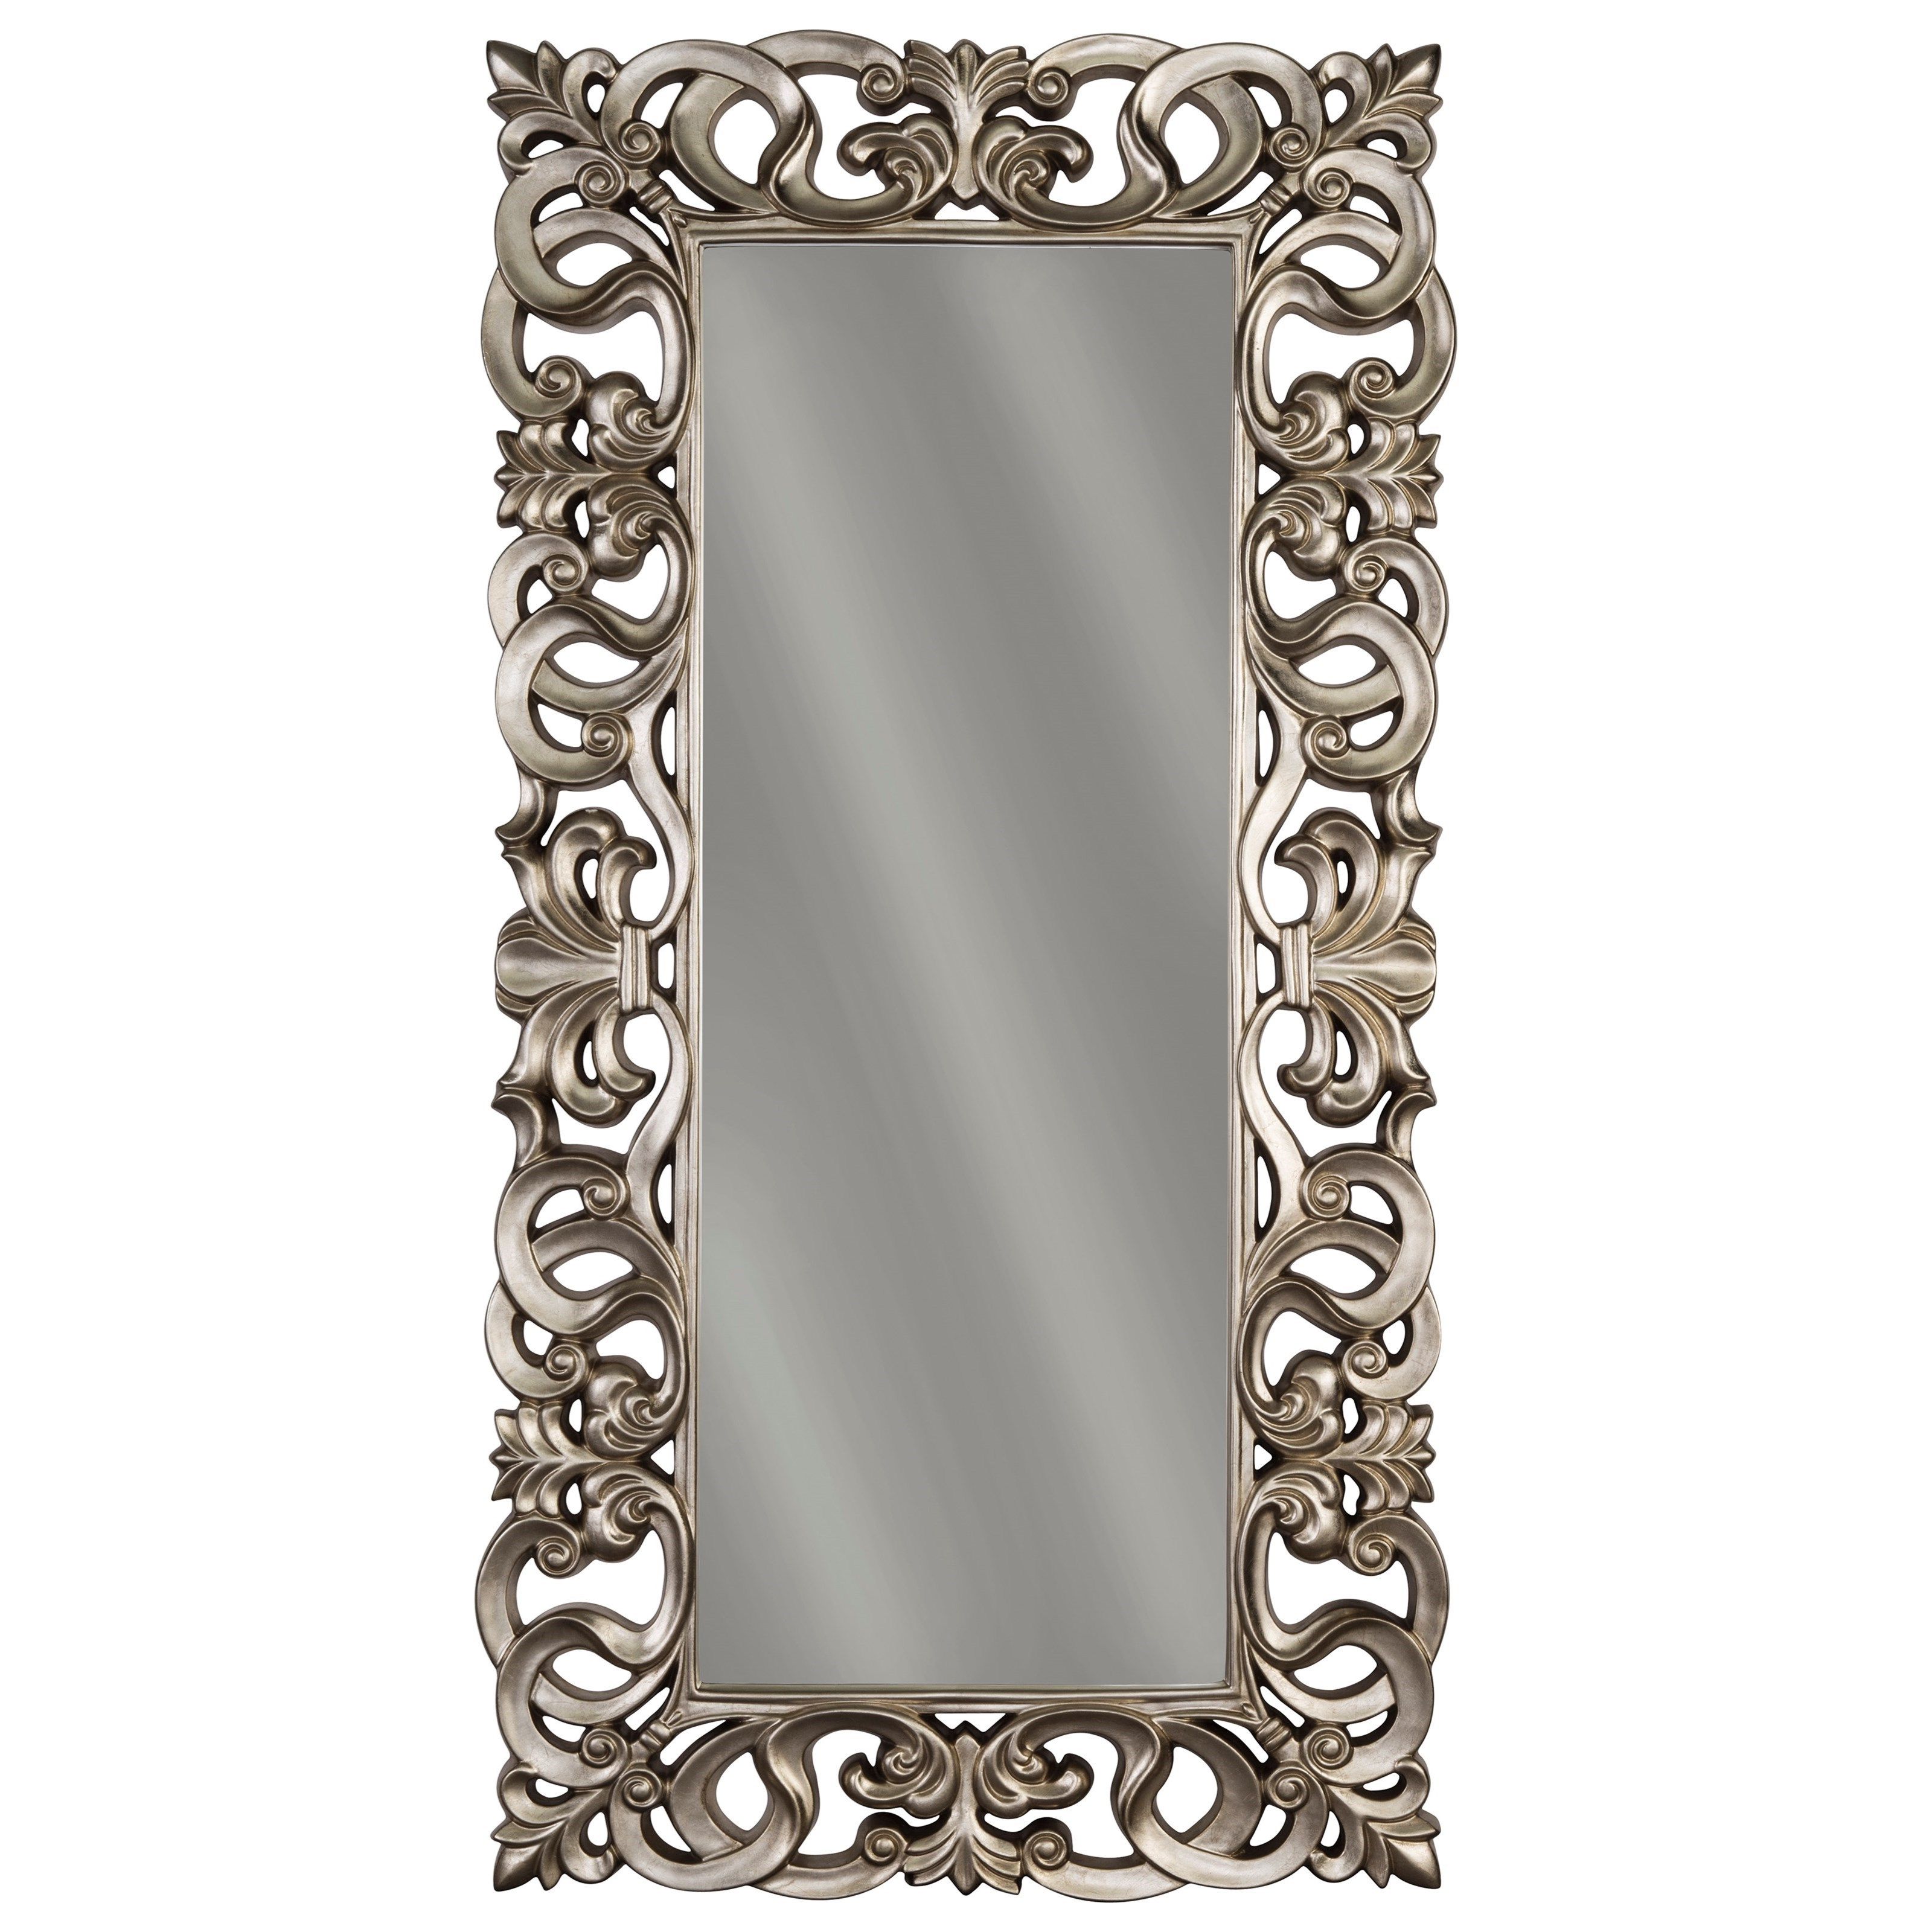 Rectangle Accent Mirrors Intended For Most Current Accent Mirrors Lucia Antique Silver Finish Accent Mirrorashley  Signature Design At Dunk & Bright Furniture (View 6 of 20)